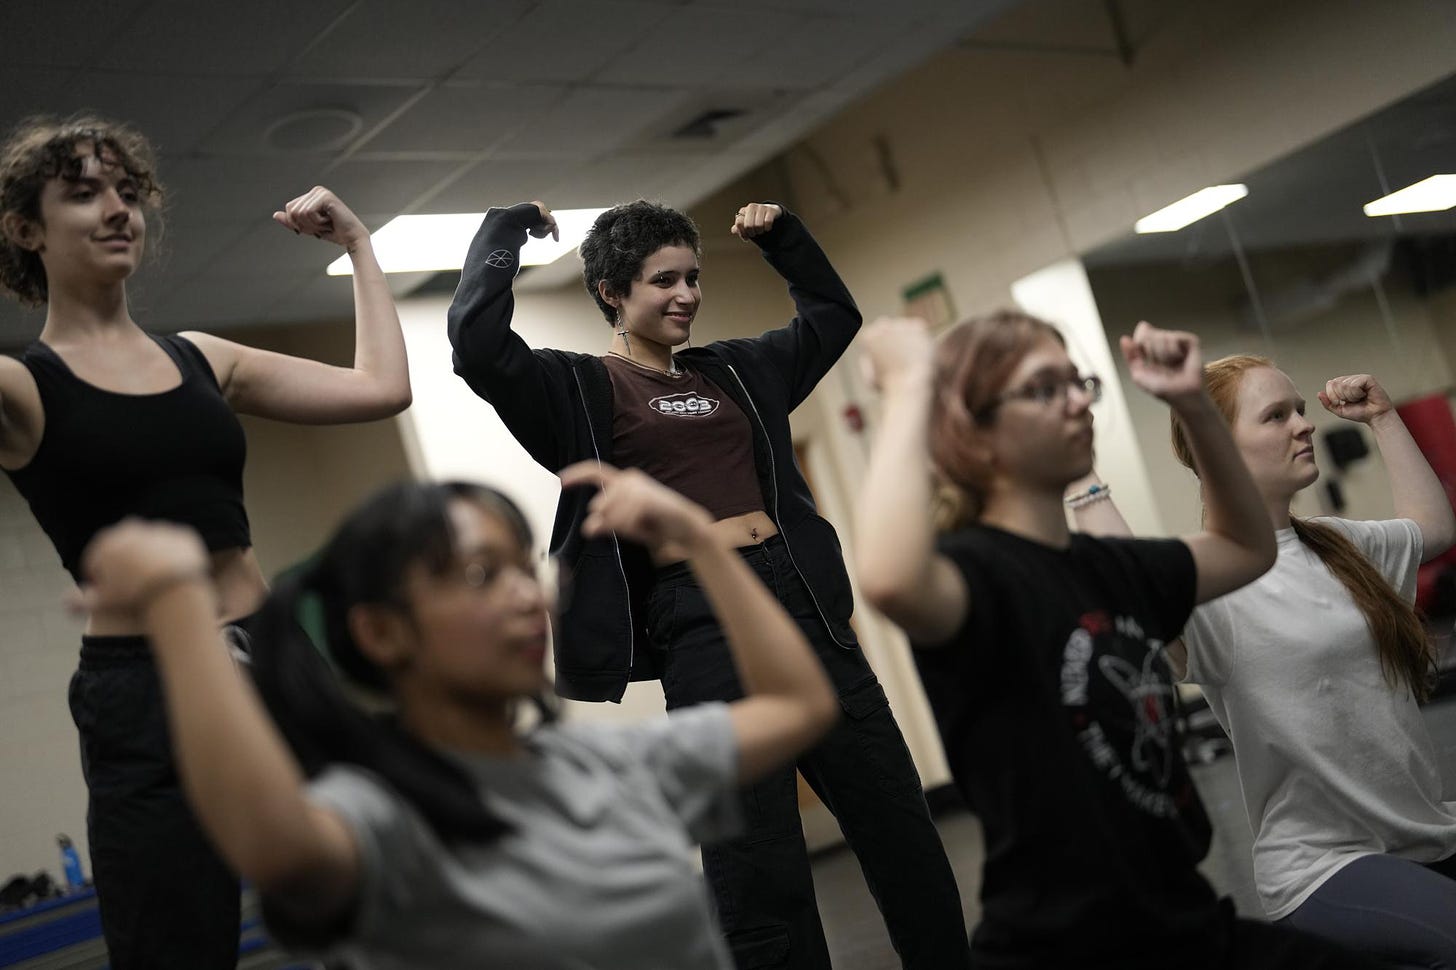 Gaby Batista, 19, center, an anthropology major at New College of Florida learns a dance routine to perform for fun along with other students, Wednesday, March 1, 2023, in Sarasota, Fla. Batista says the student body at New College is tight-knit and accepting, nothing like at her high school in Broward County, Florida where she was was teased for being different, for having hobbies like anime and K-pop and for an expressive style of dressing. (AP Photo/Rebecca Blackwell)